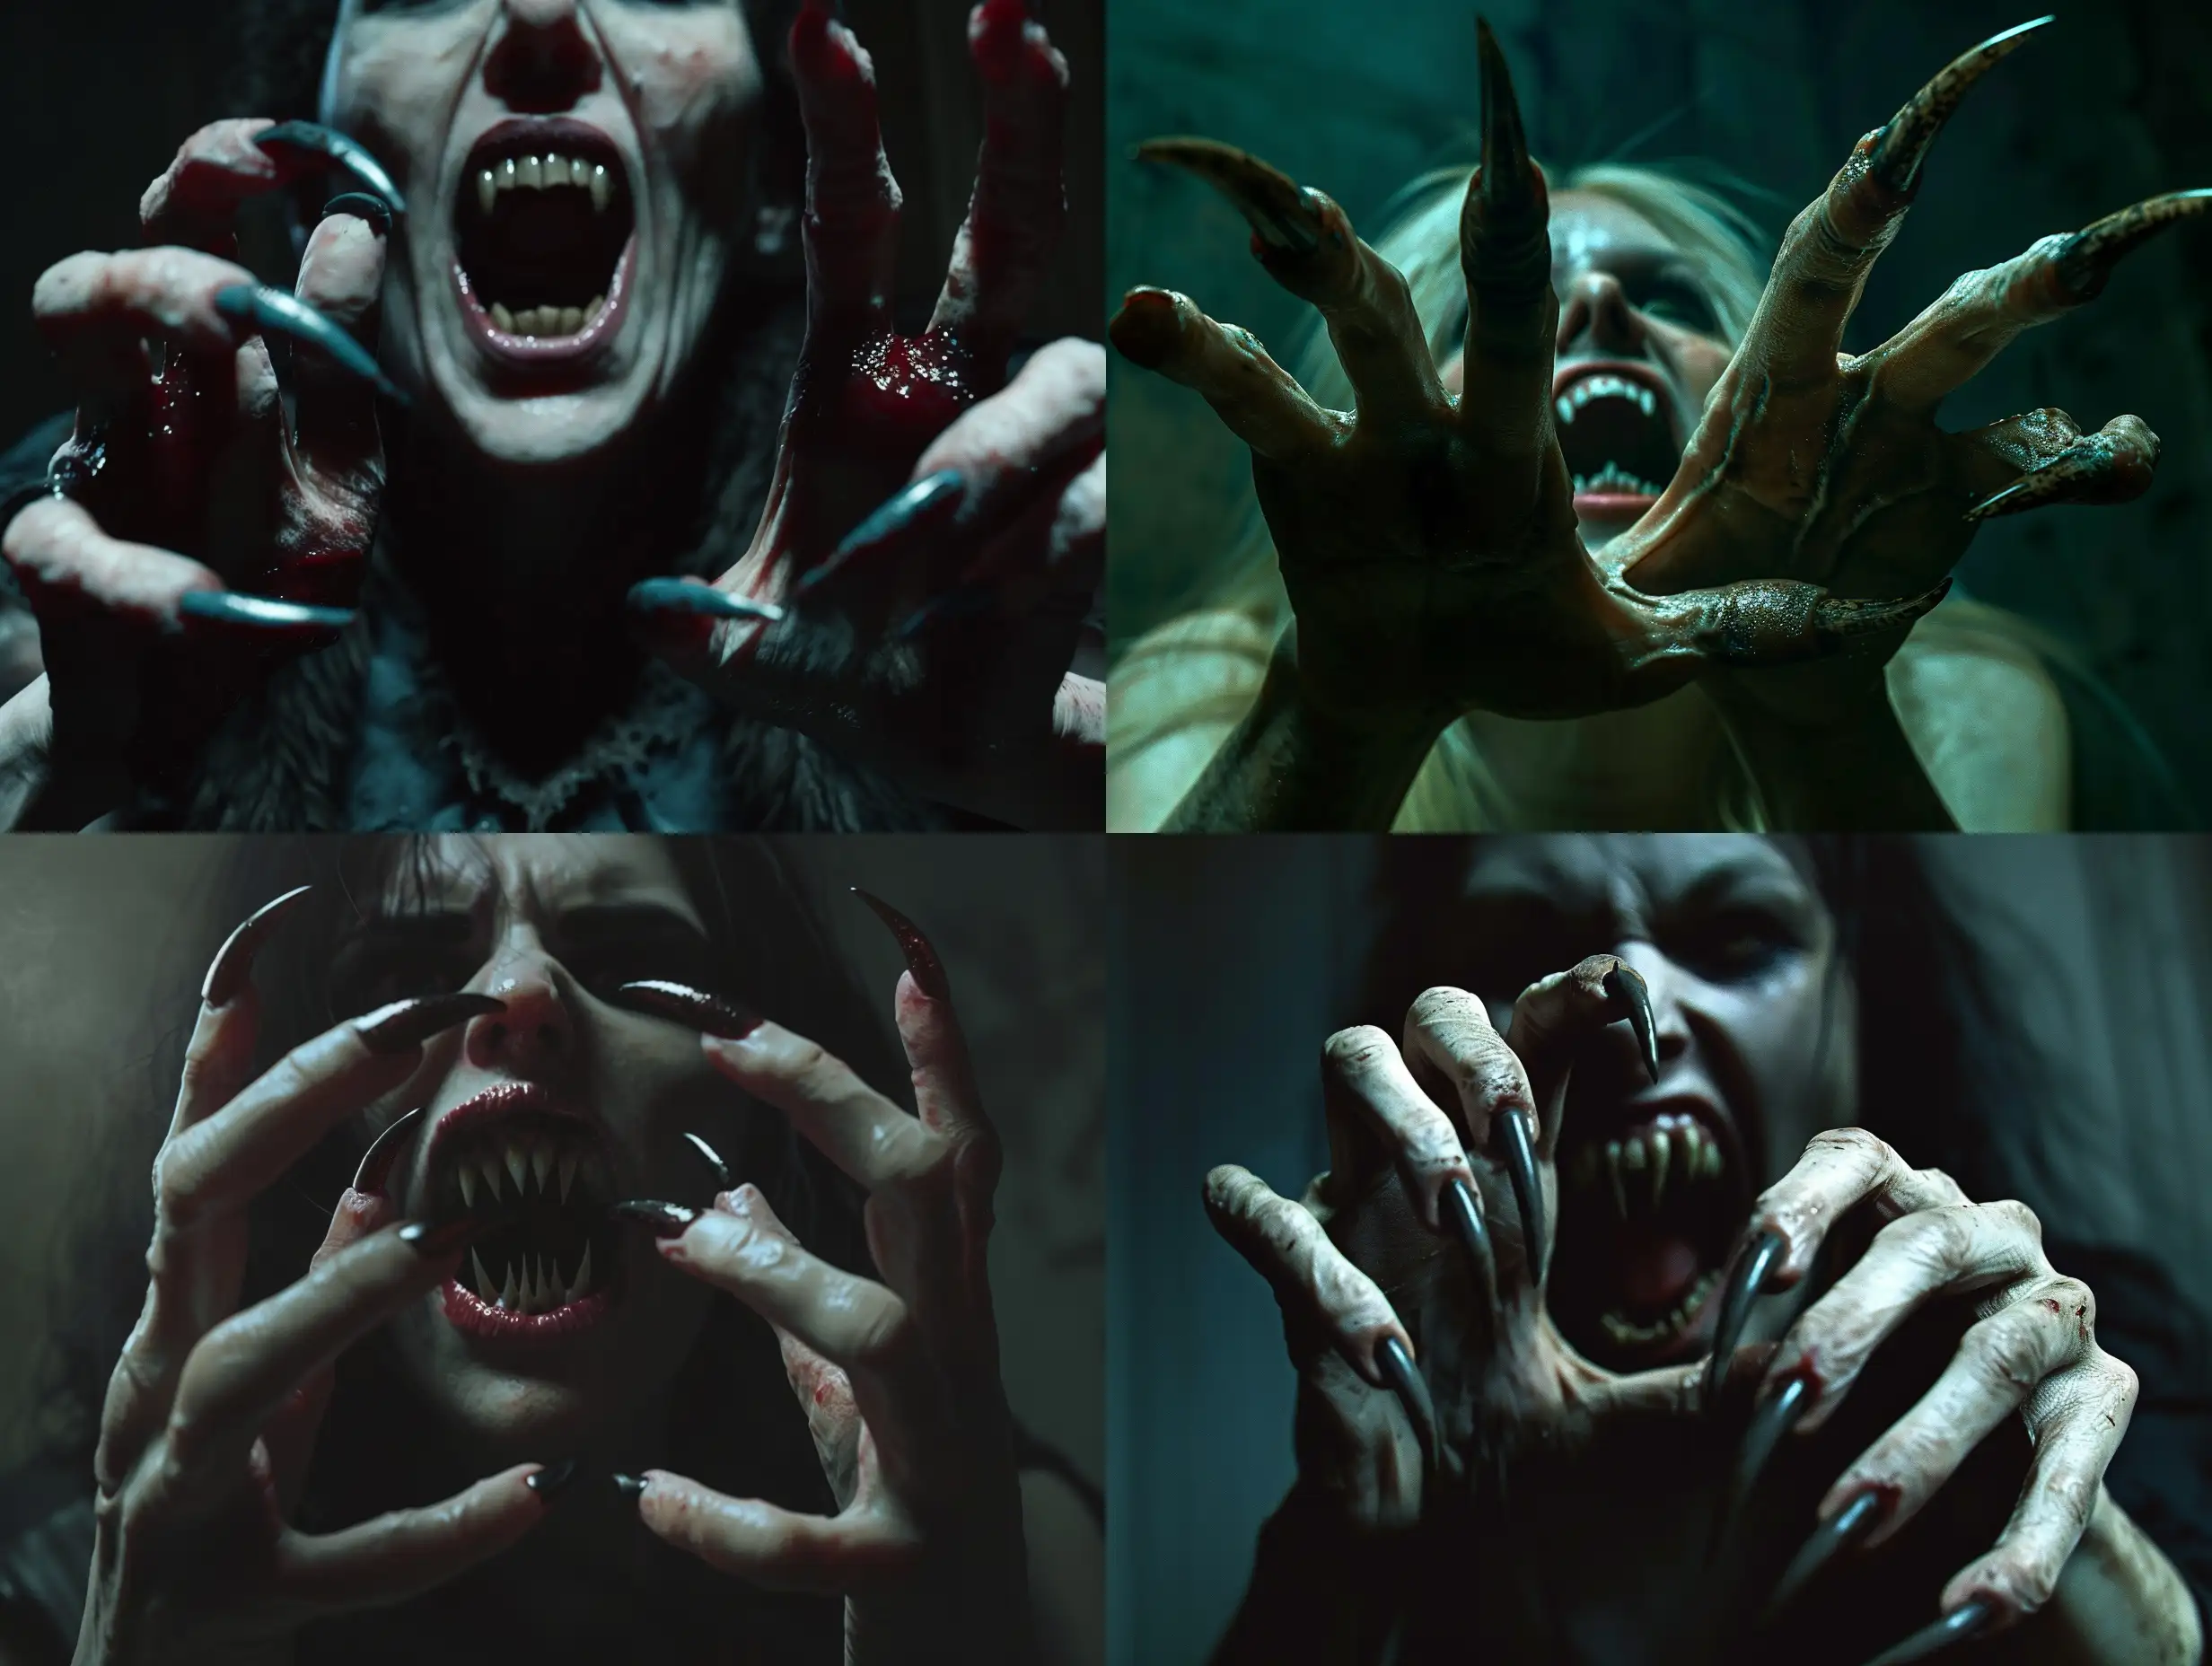 Photorealistic-Wild-Ugly-Monstrous-Vampire-Woman-with-Long-Fingernails-in-Dark-Room